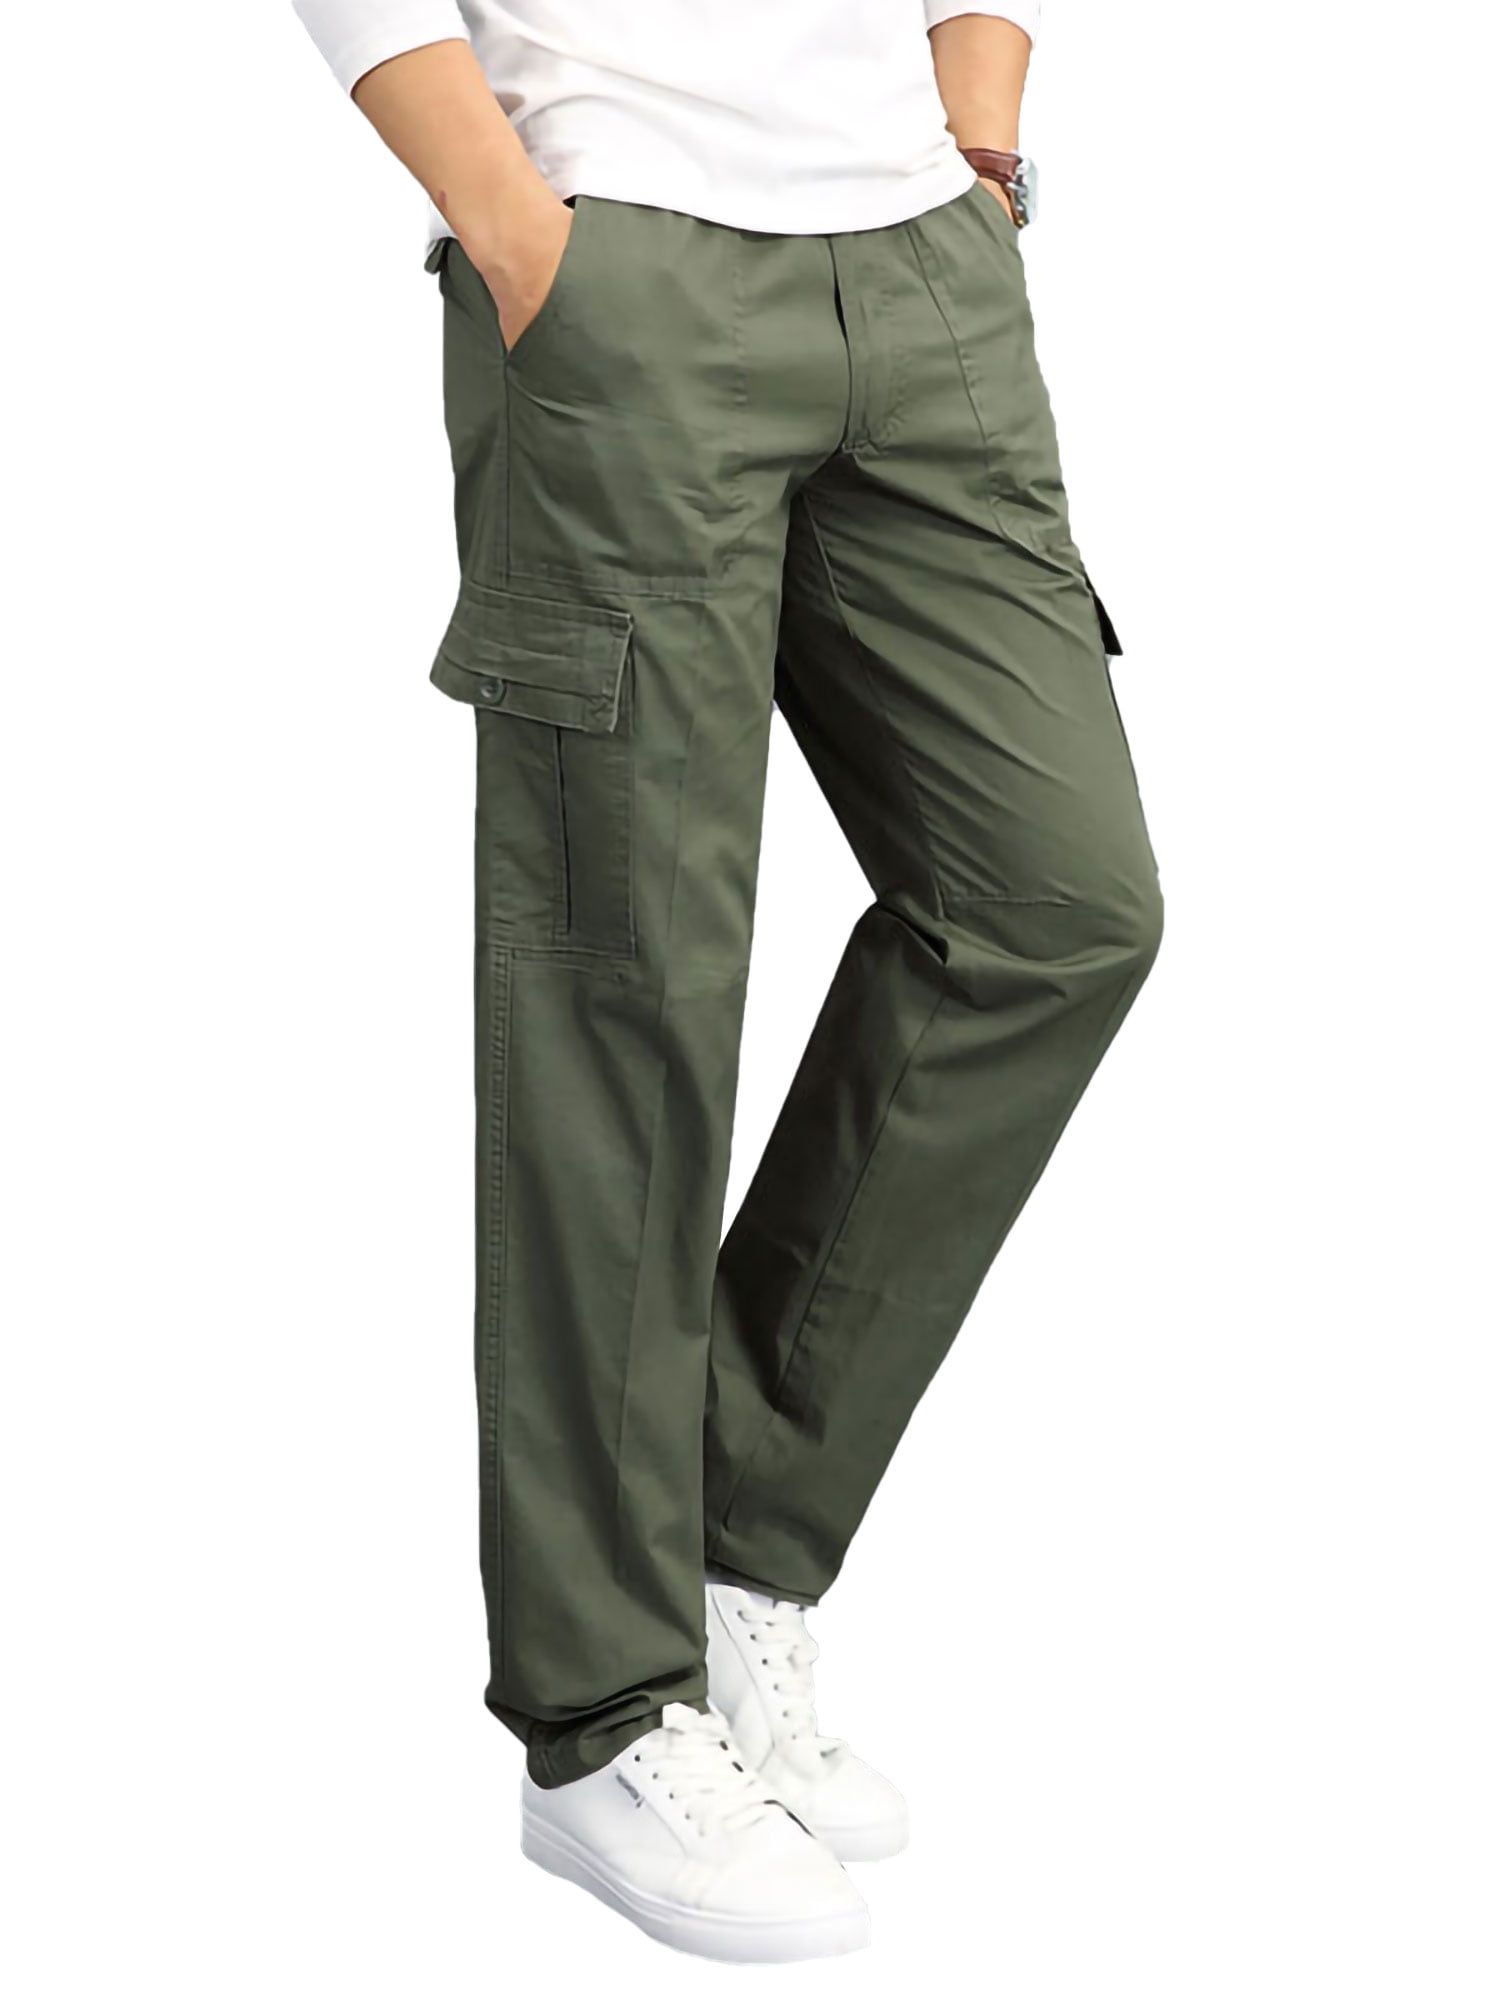 Mens Tactical Pants Outdoor Hiking Trousers Casual Work Cargo Army Combat Pants 